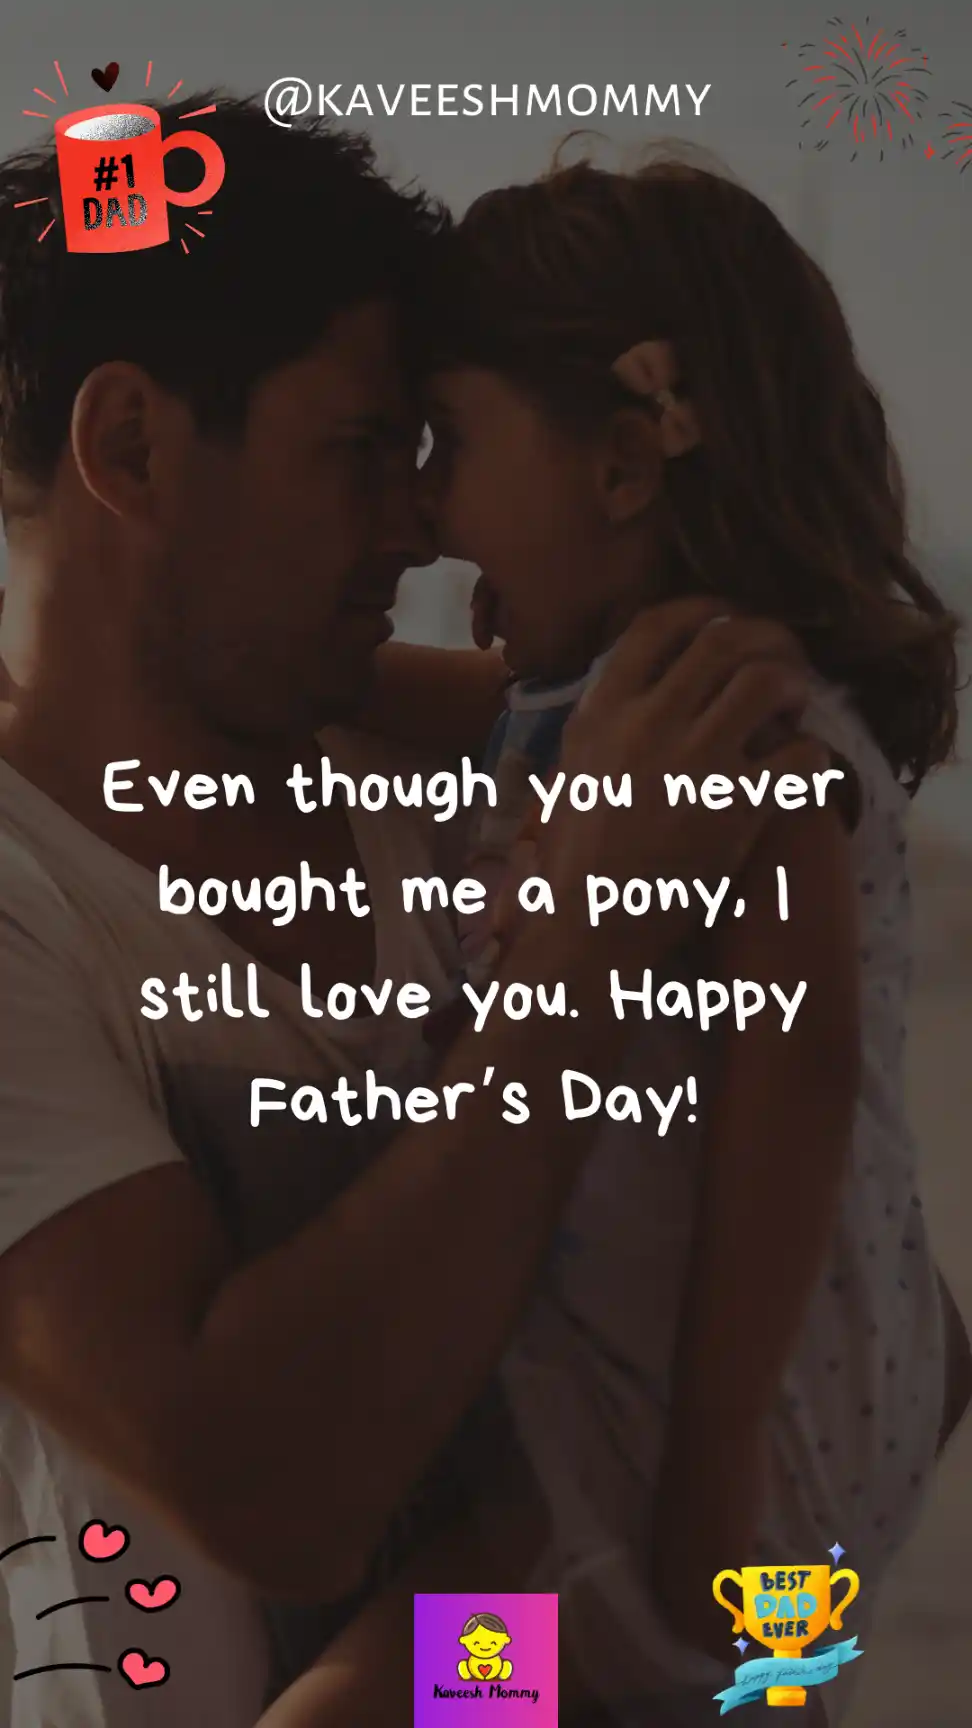 fathers day captions from daughter-Even though you never bought me a pony, I still love you. Happy Father’s Day!